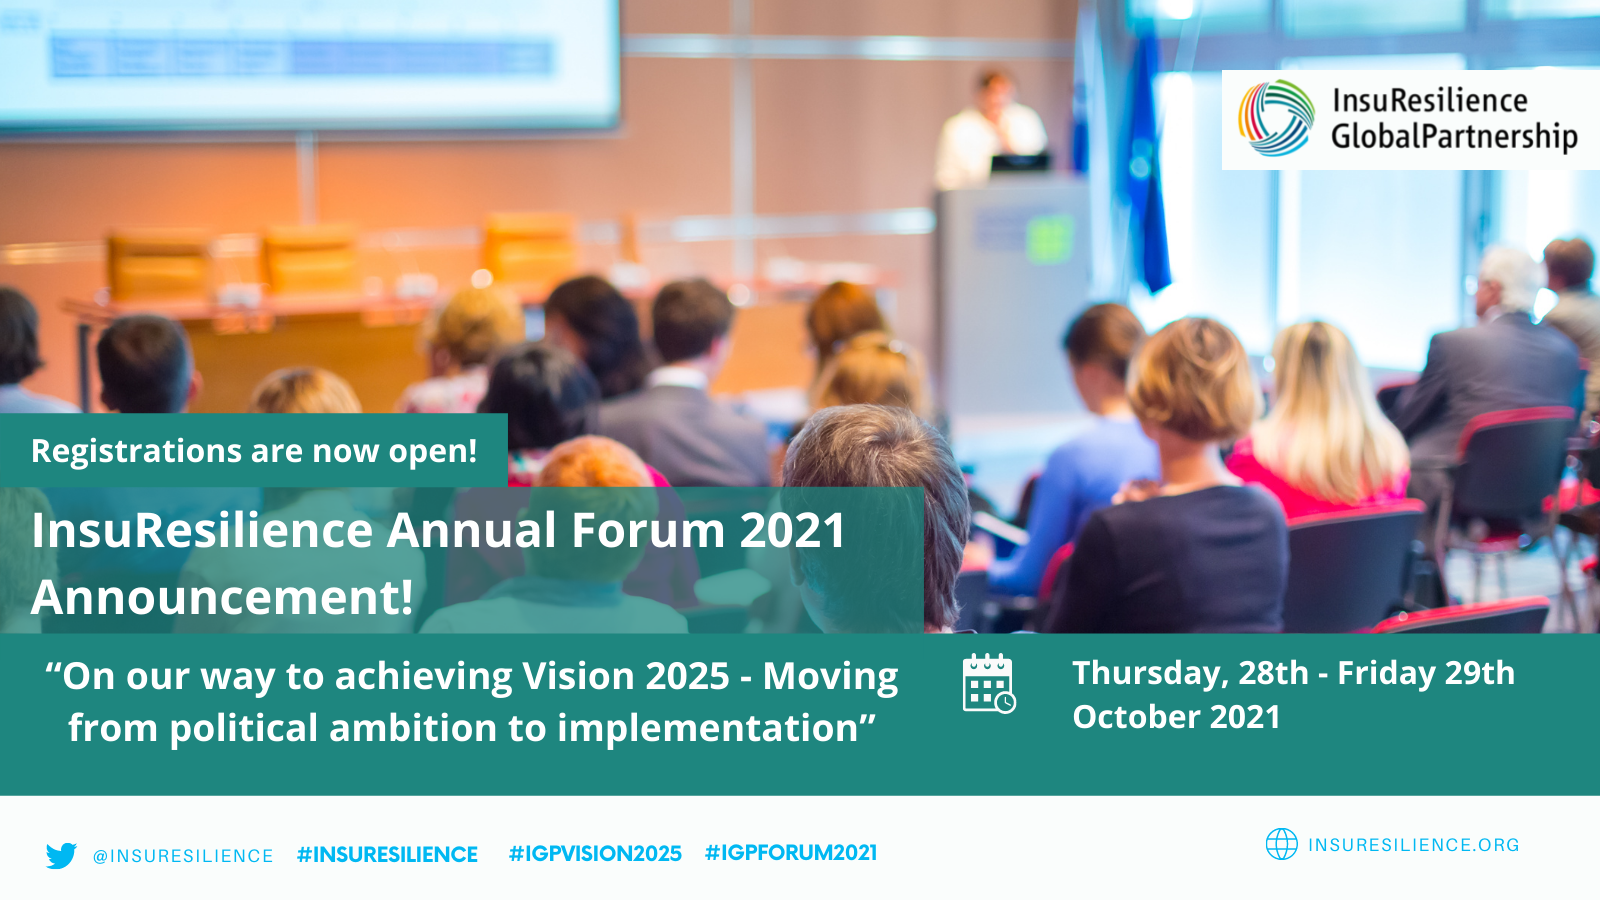 Poster for the INSURESILIENCE GLOBAL PARTNERSHIP ANNUAL FORUM 2021 on October 28-29 2021